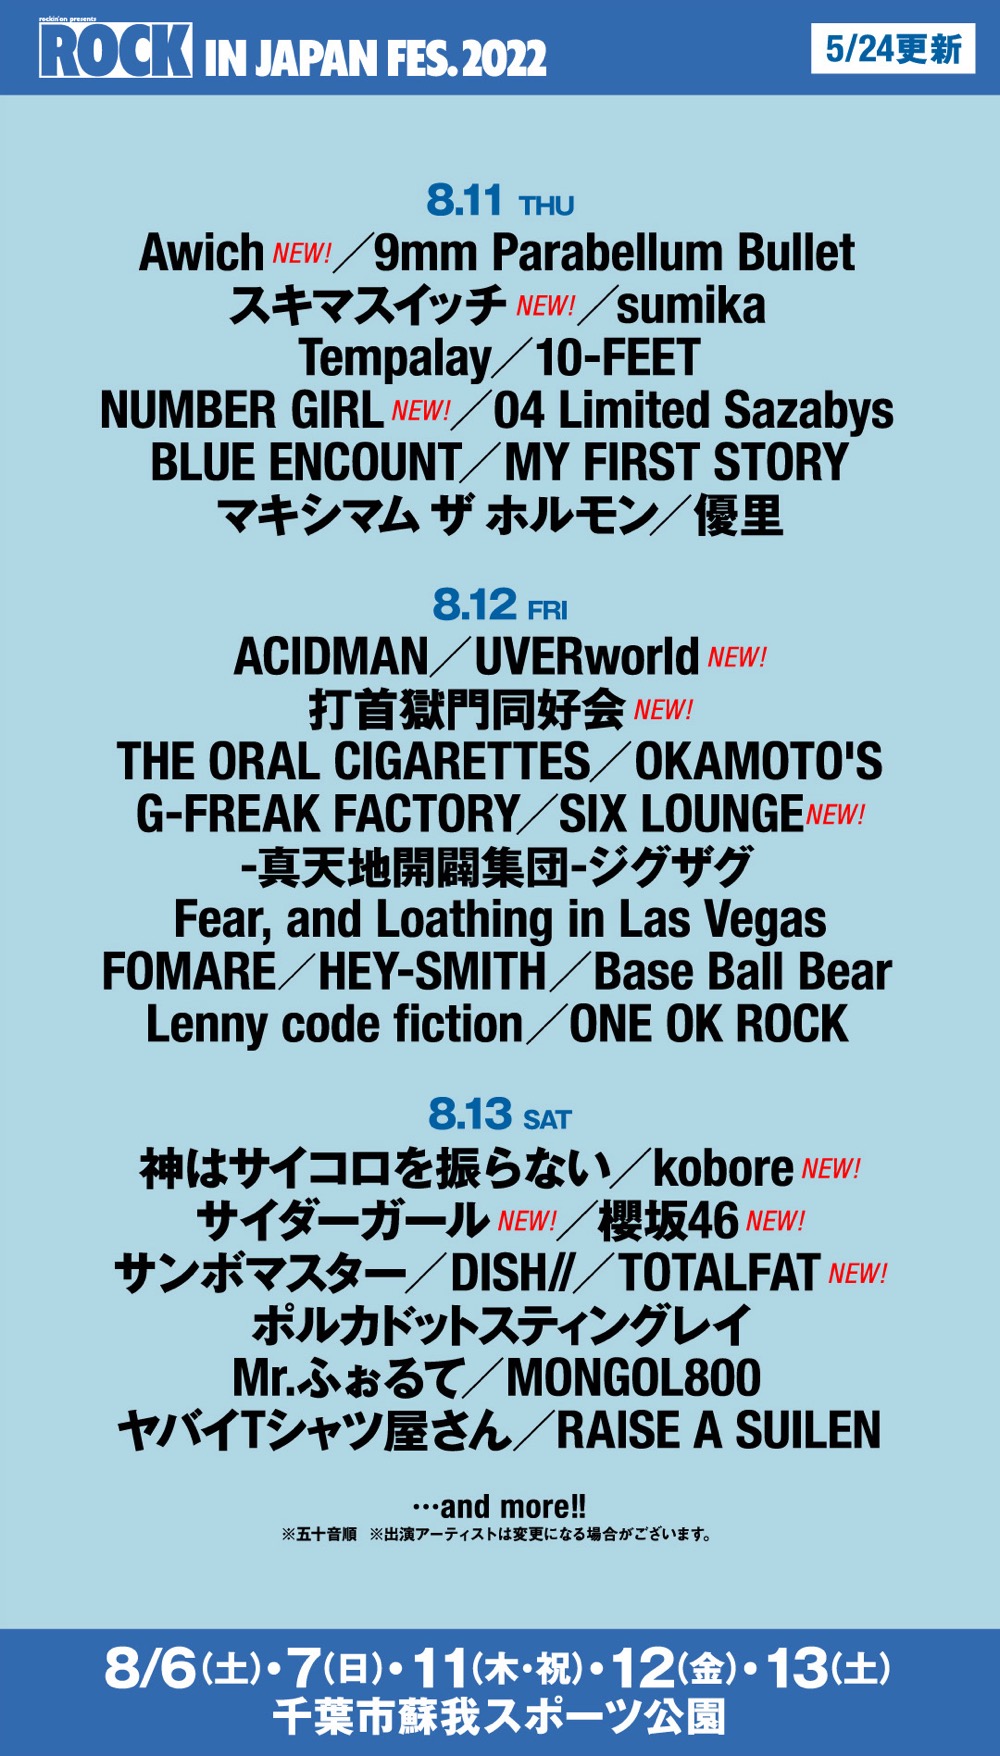 『ROCK IN JAPAN FES. 2022』マカえん、UVER、櫻坂46ら17組の出演があらたに決定 - 画像一覧（2/4）